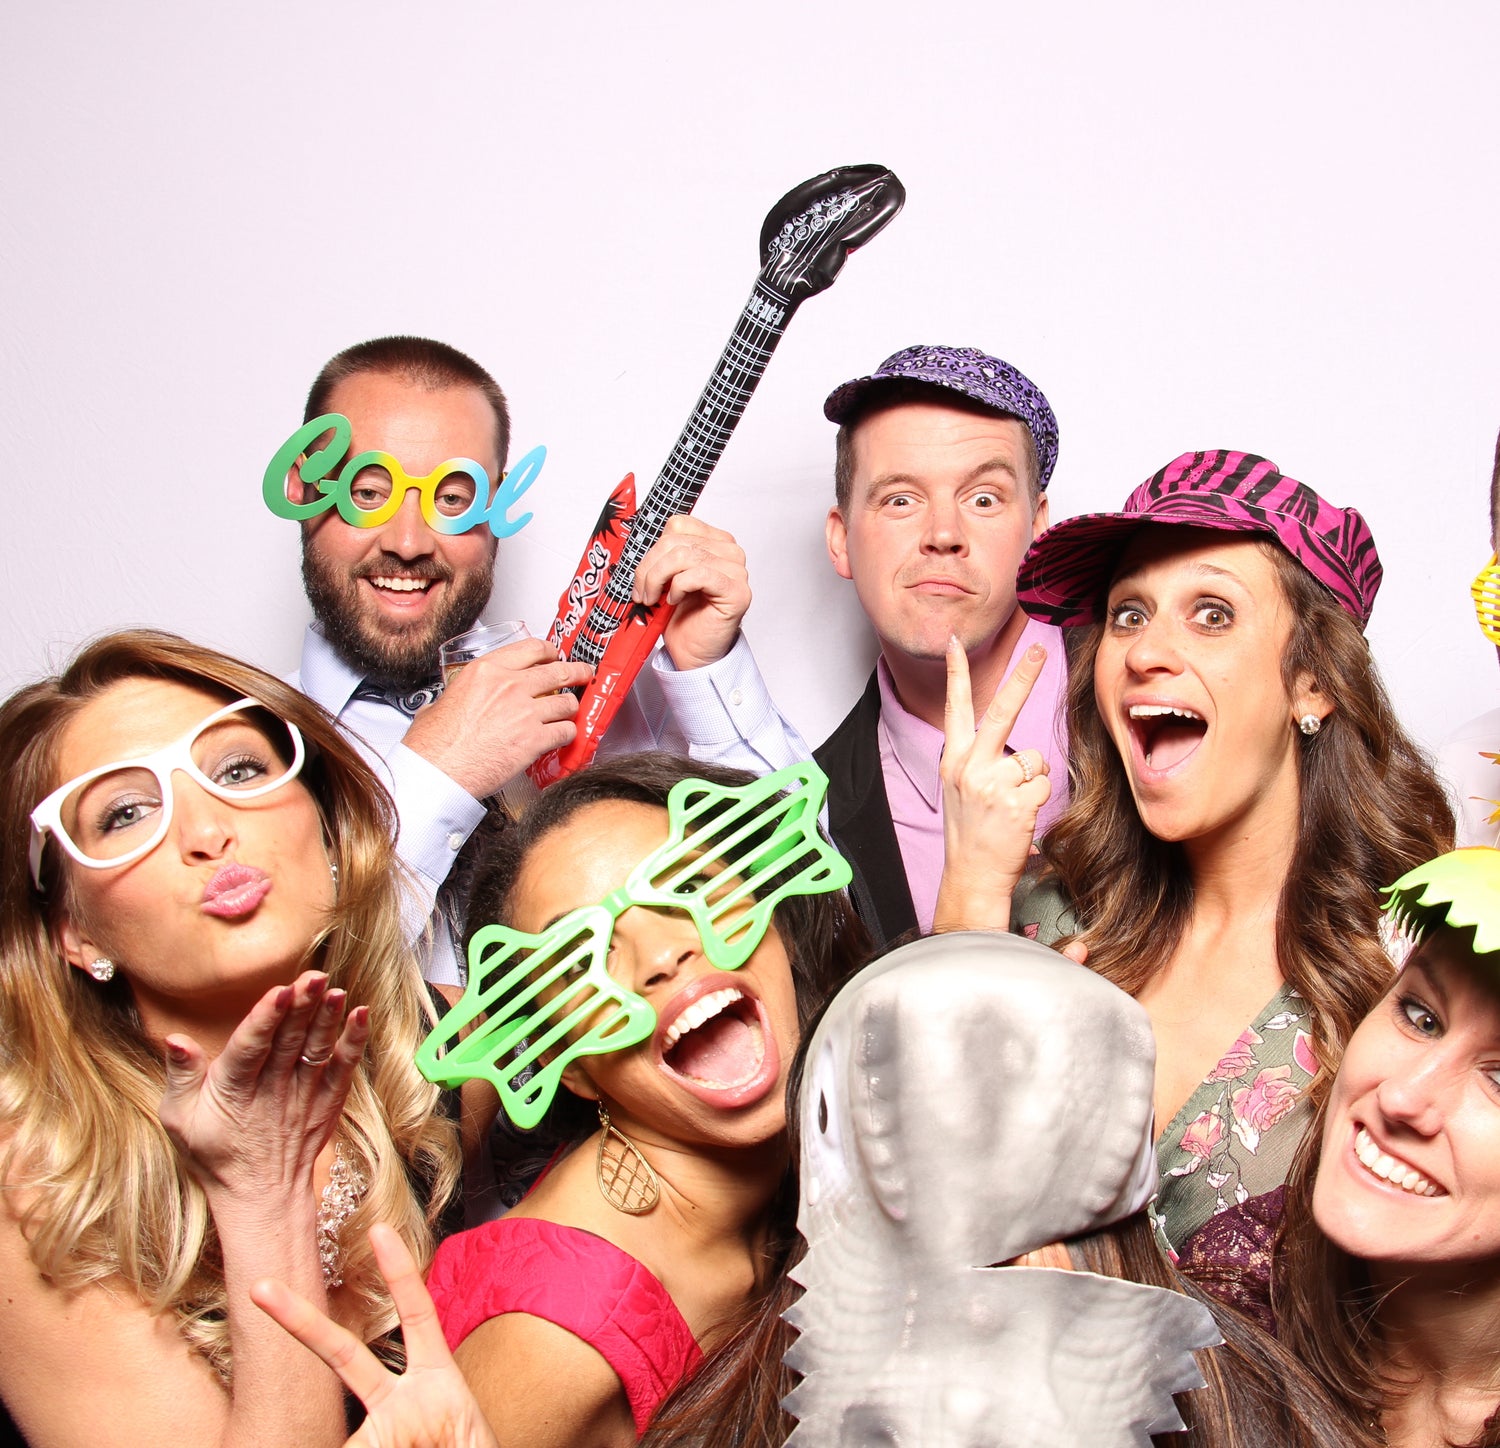 Friends getting crazy in a wedding photo booth in Boston